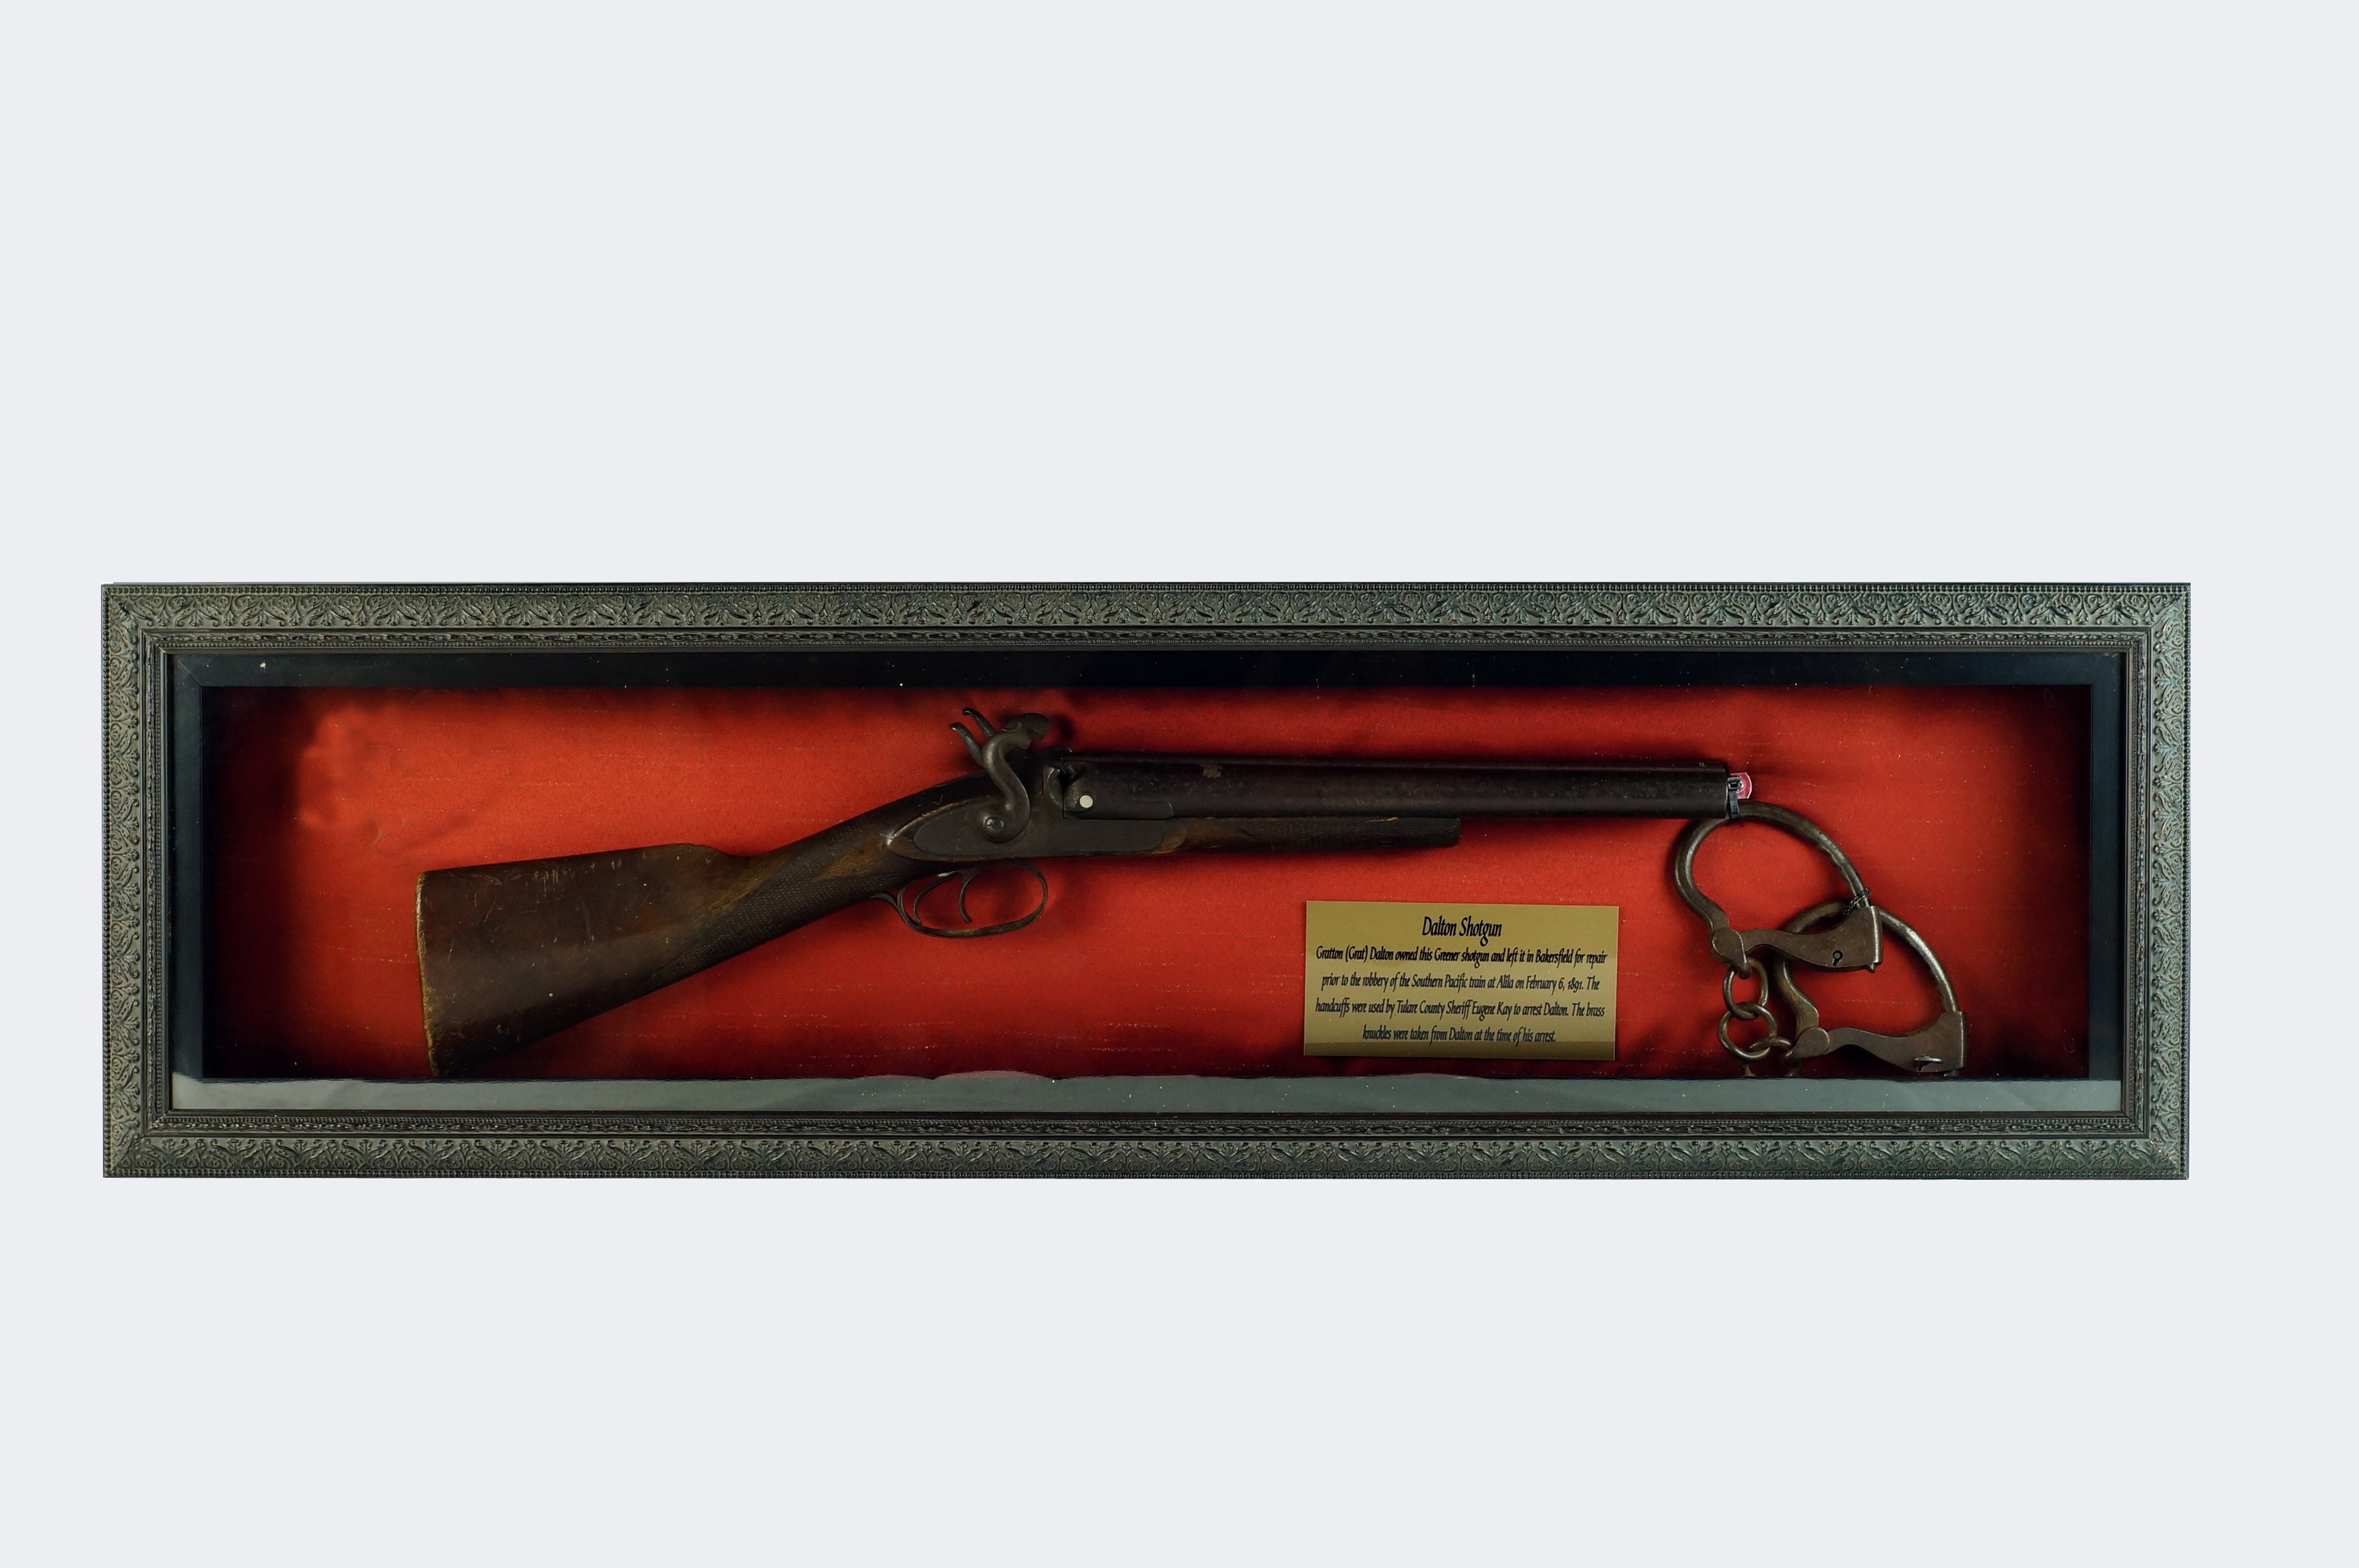 Grat's Shotgun shown in it's shadowbox and lot 200a, the Sheriff Eugene Kay Handcuff's used to arrest both Grat and Bill Dalton in 1891